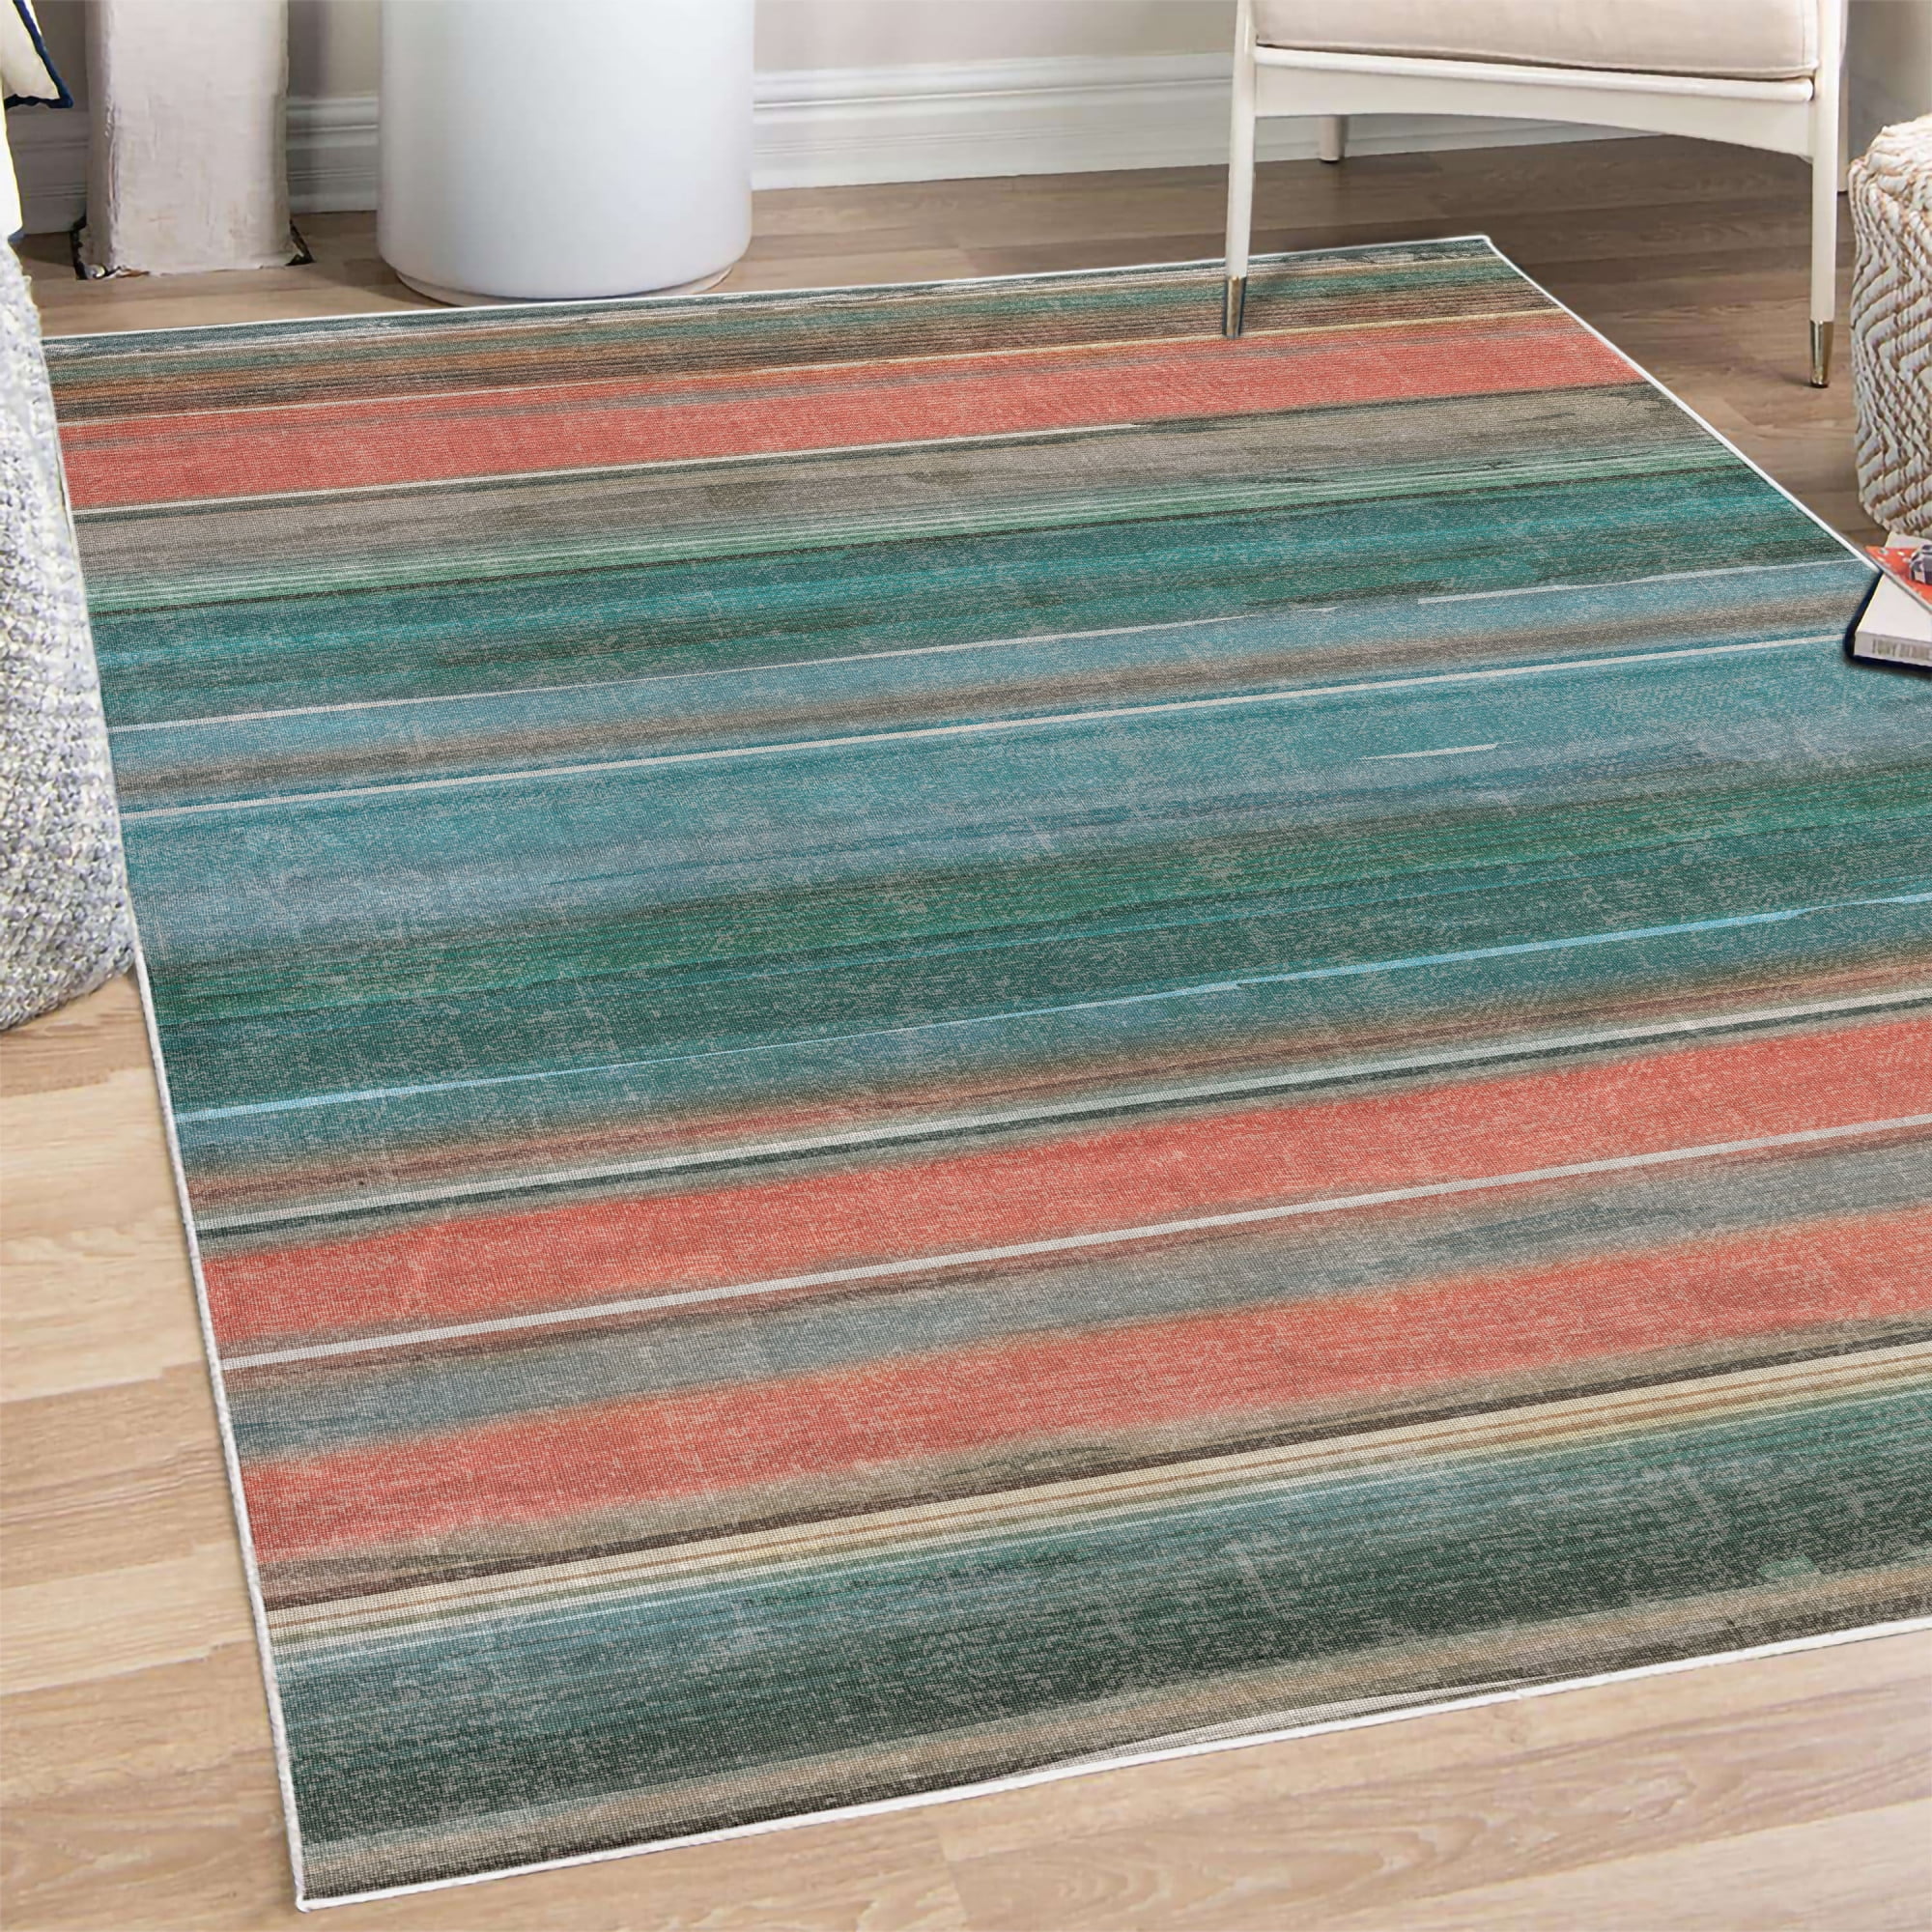 Striped Area Rug with Non-Slip Backing, Colorful Themed Abstract Design  Lines of Modern and Ethnic Influenced Ornaments, Quality Carpet for Bedroom  